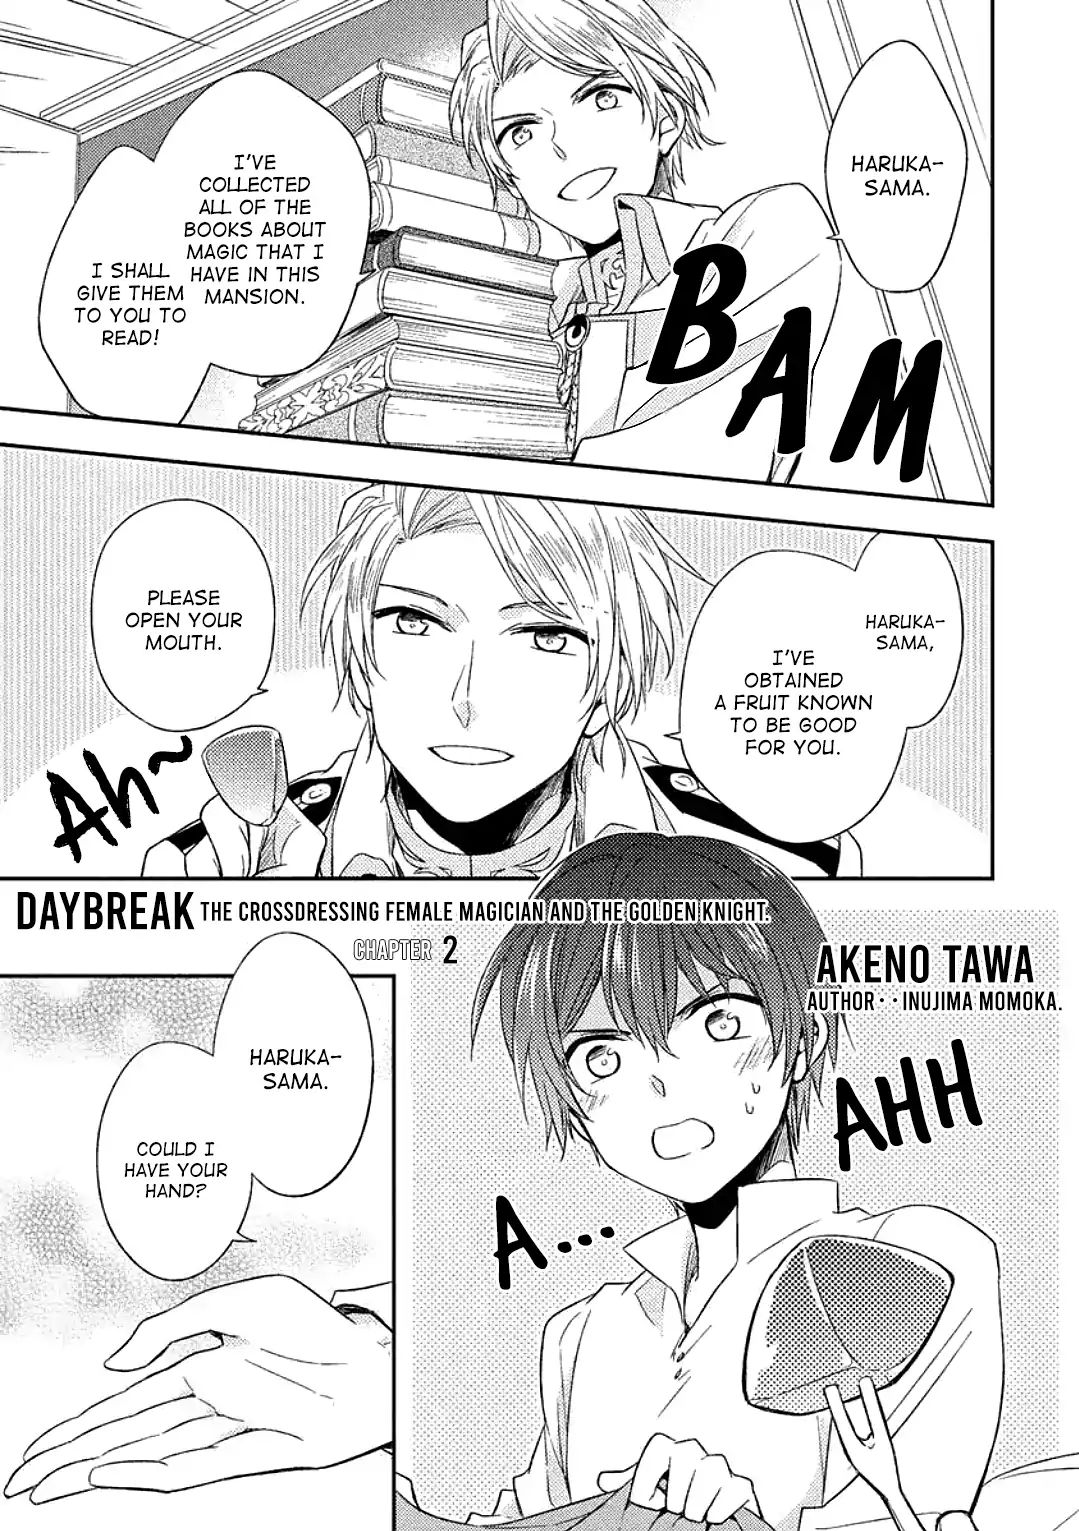 Daybreak: The Crossdressing Female Magician And The Golden Knight Chapter 2 #2